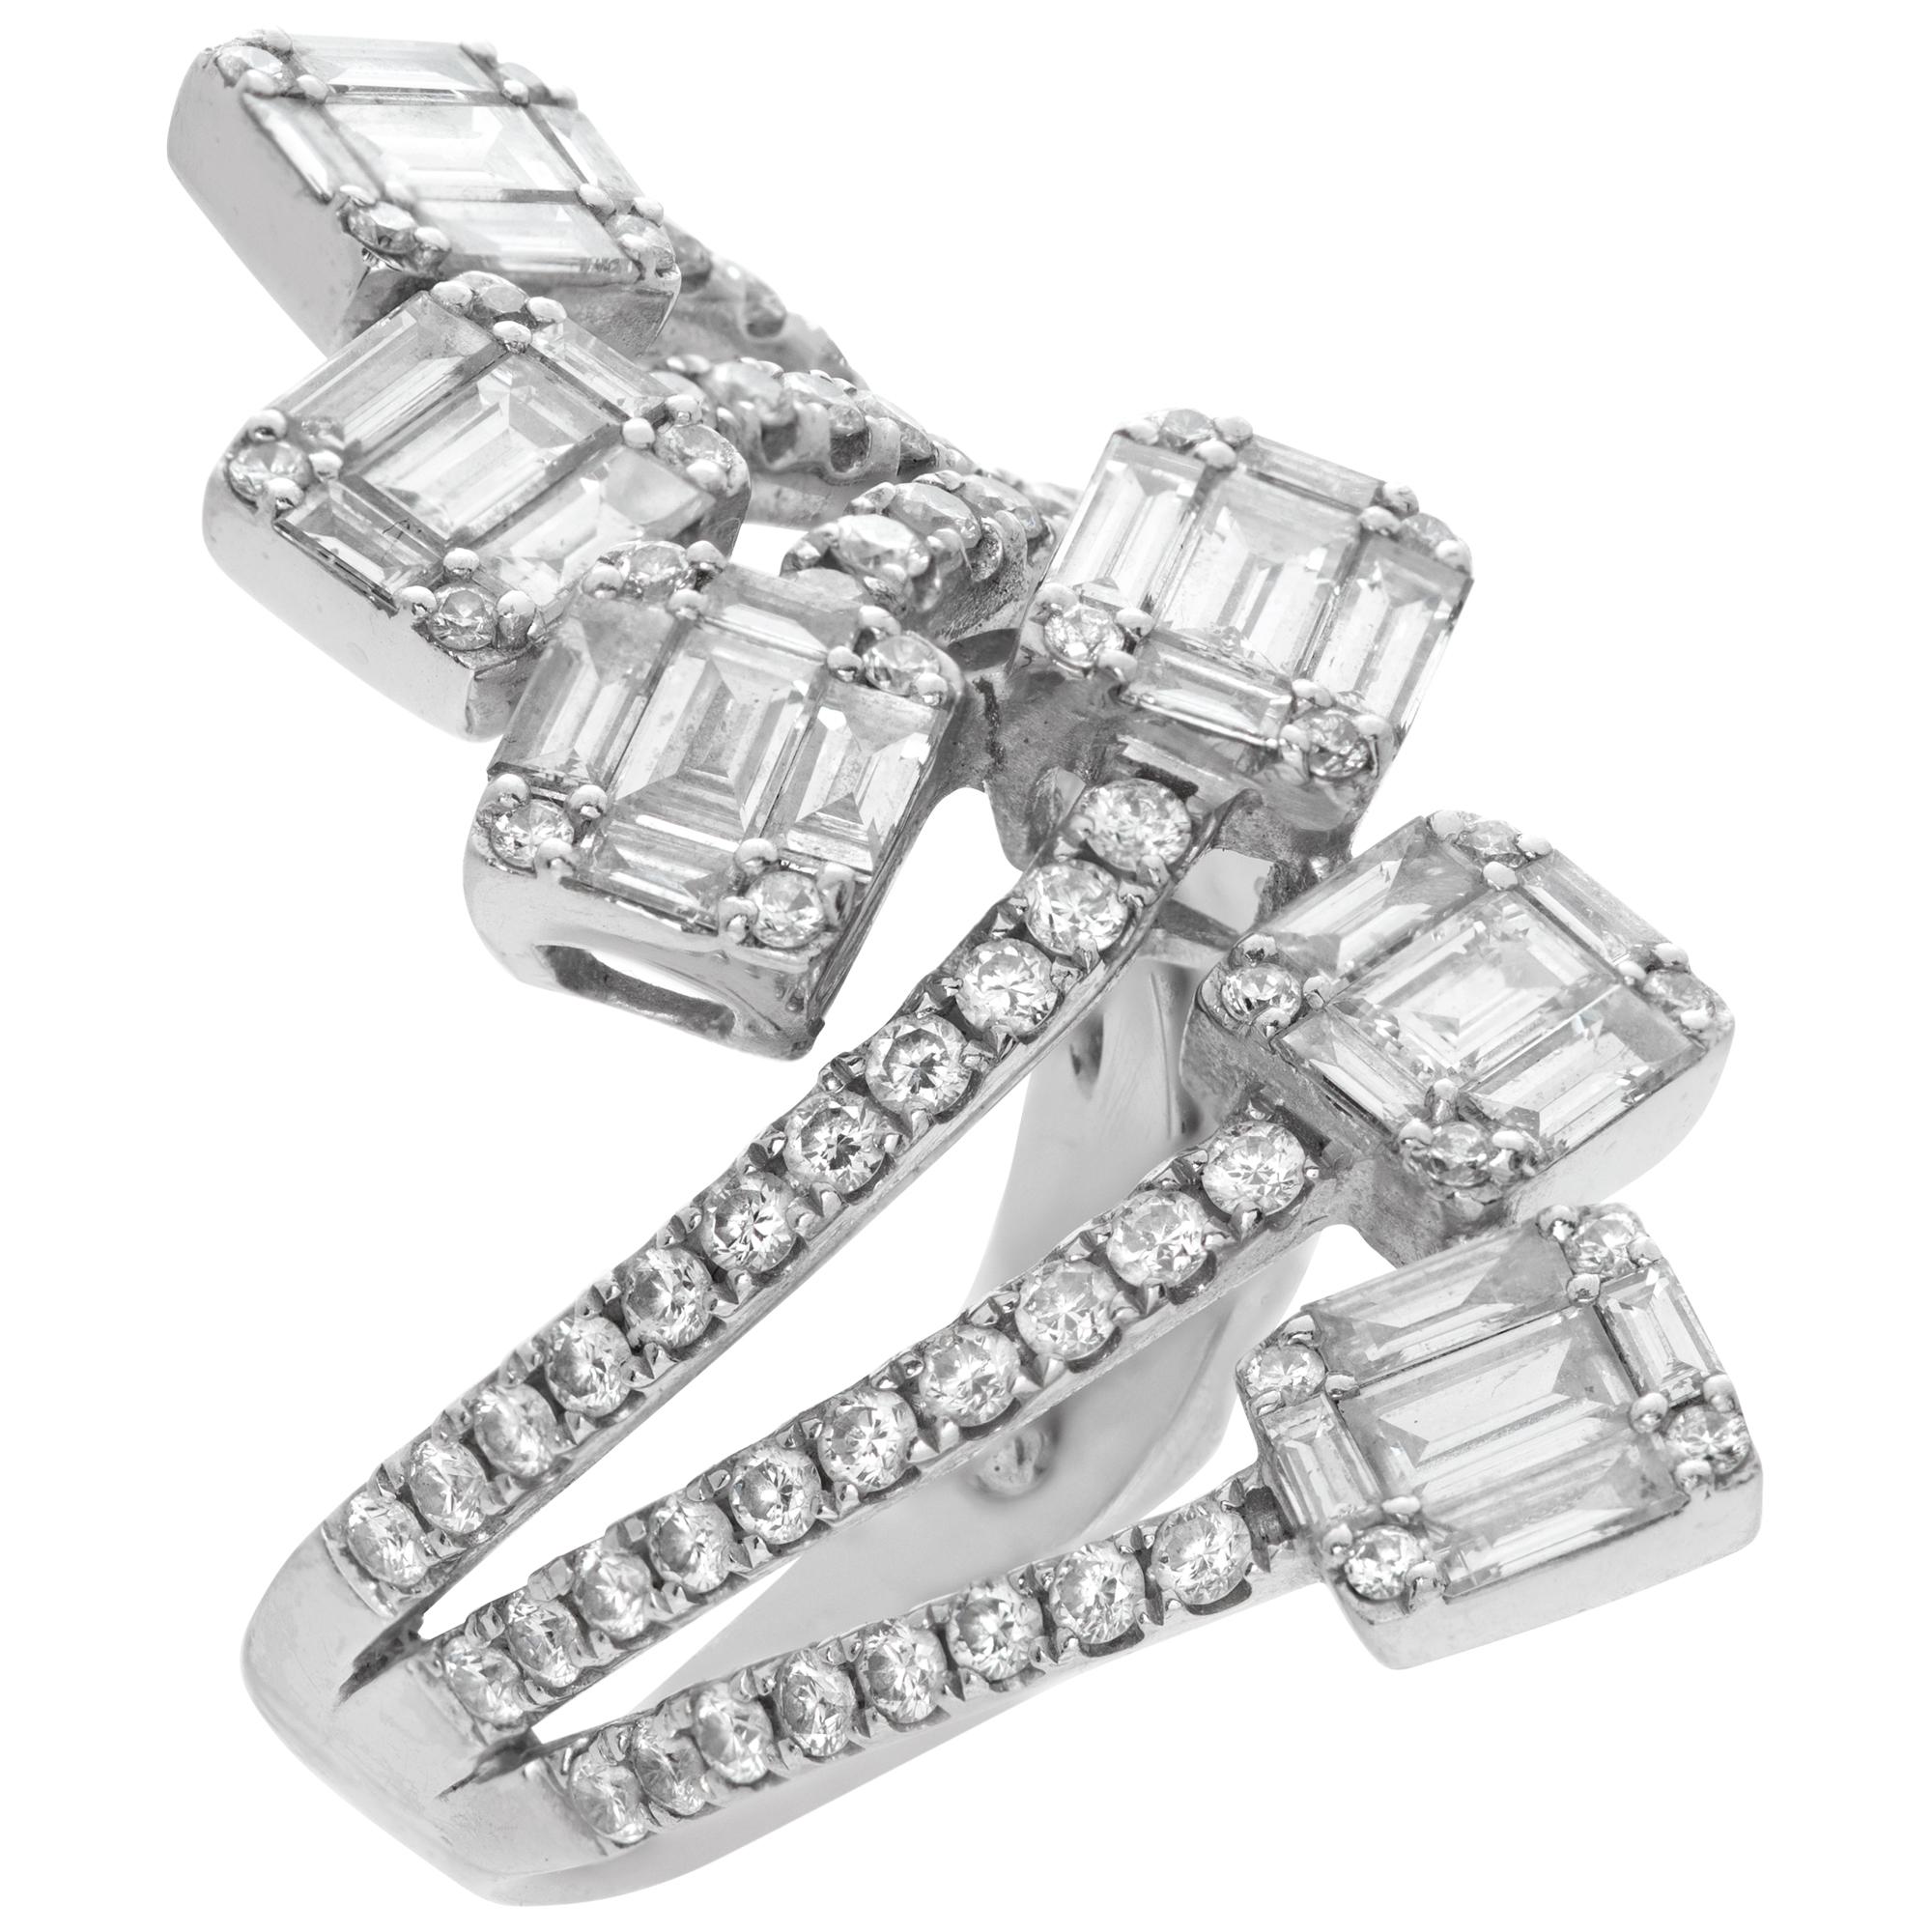 Illusion baguettes & round brilliant cut diamonds ring in white gold In Excellent Condition For Sale In Surfside, FL